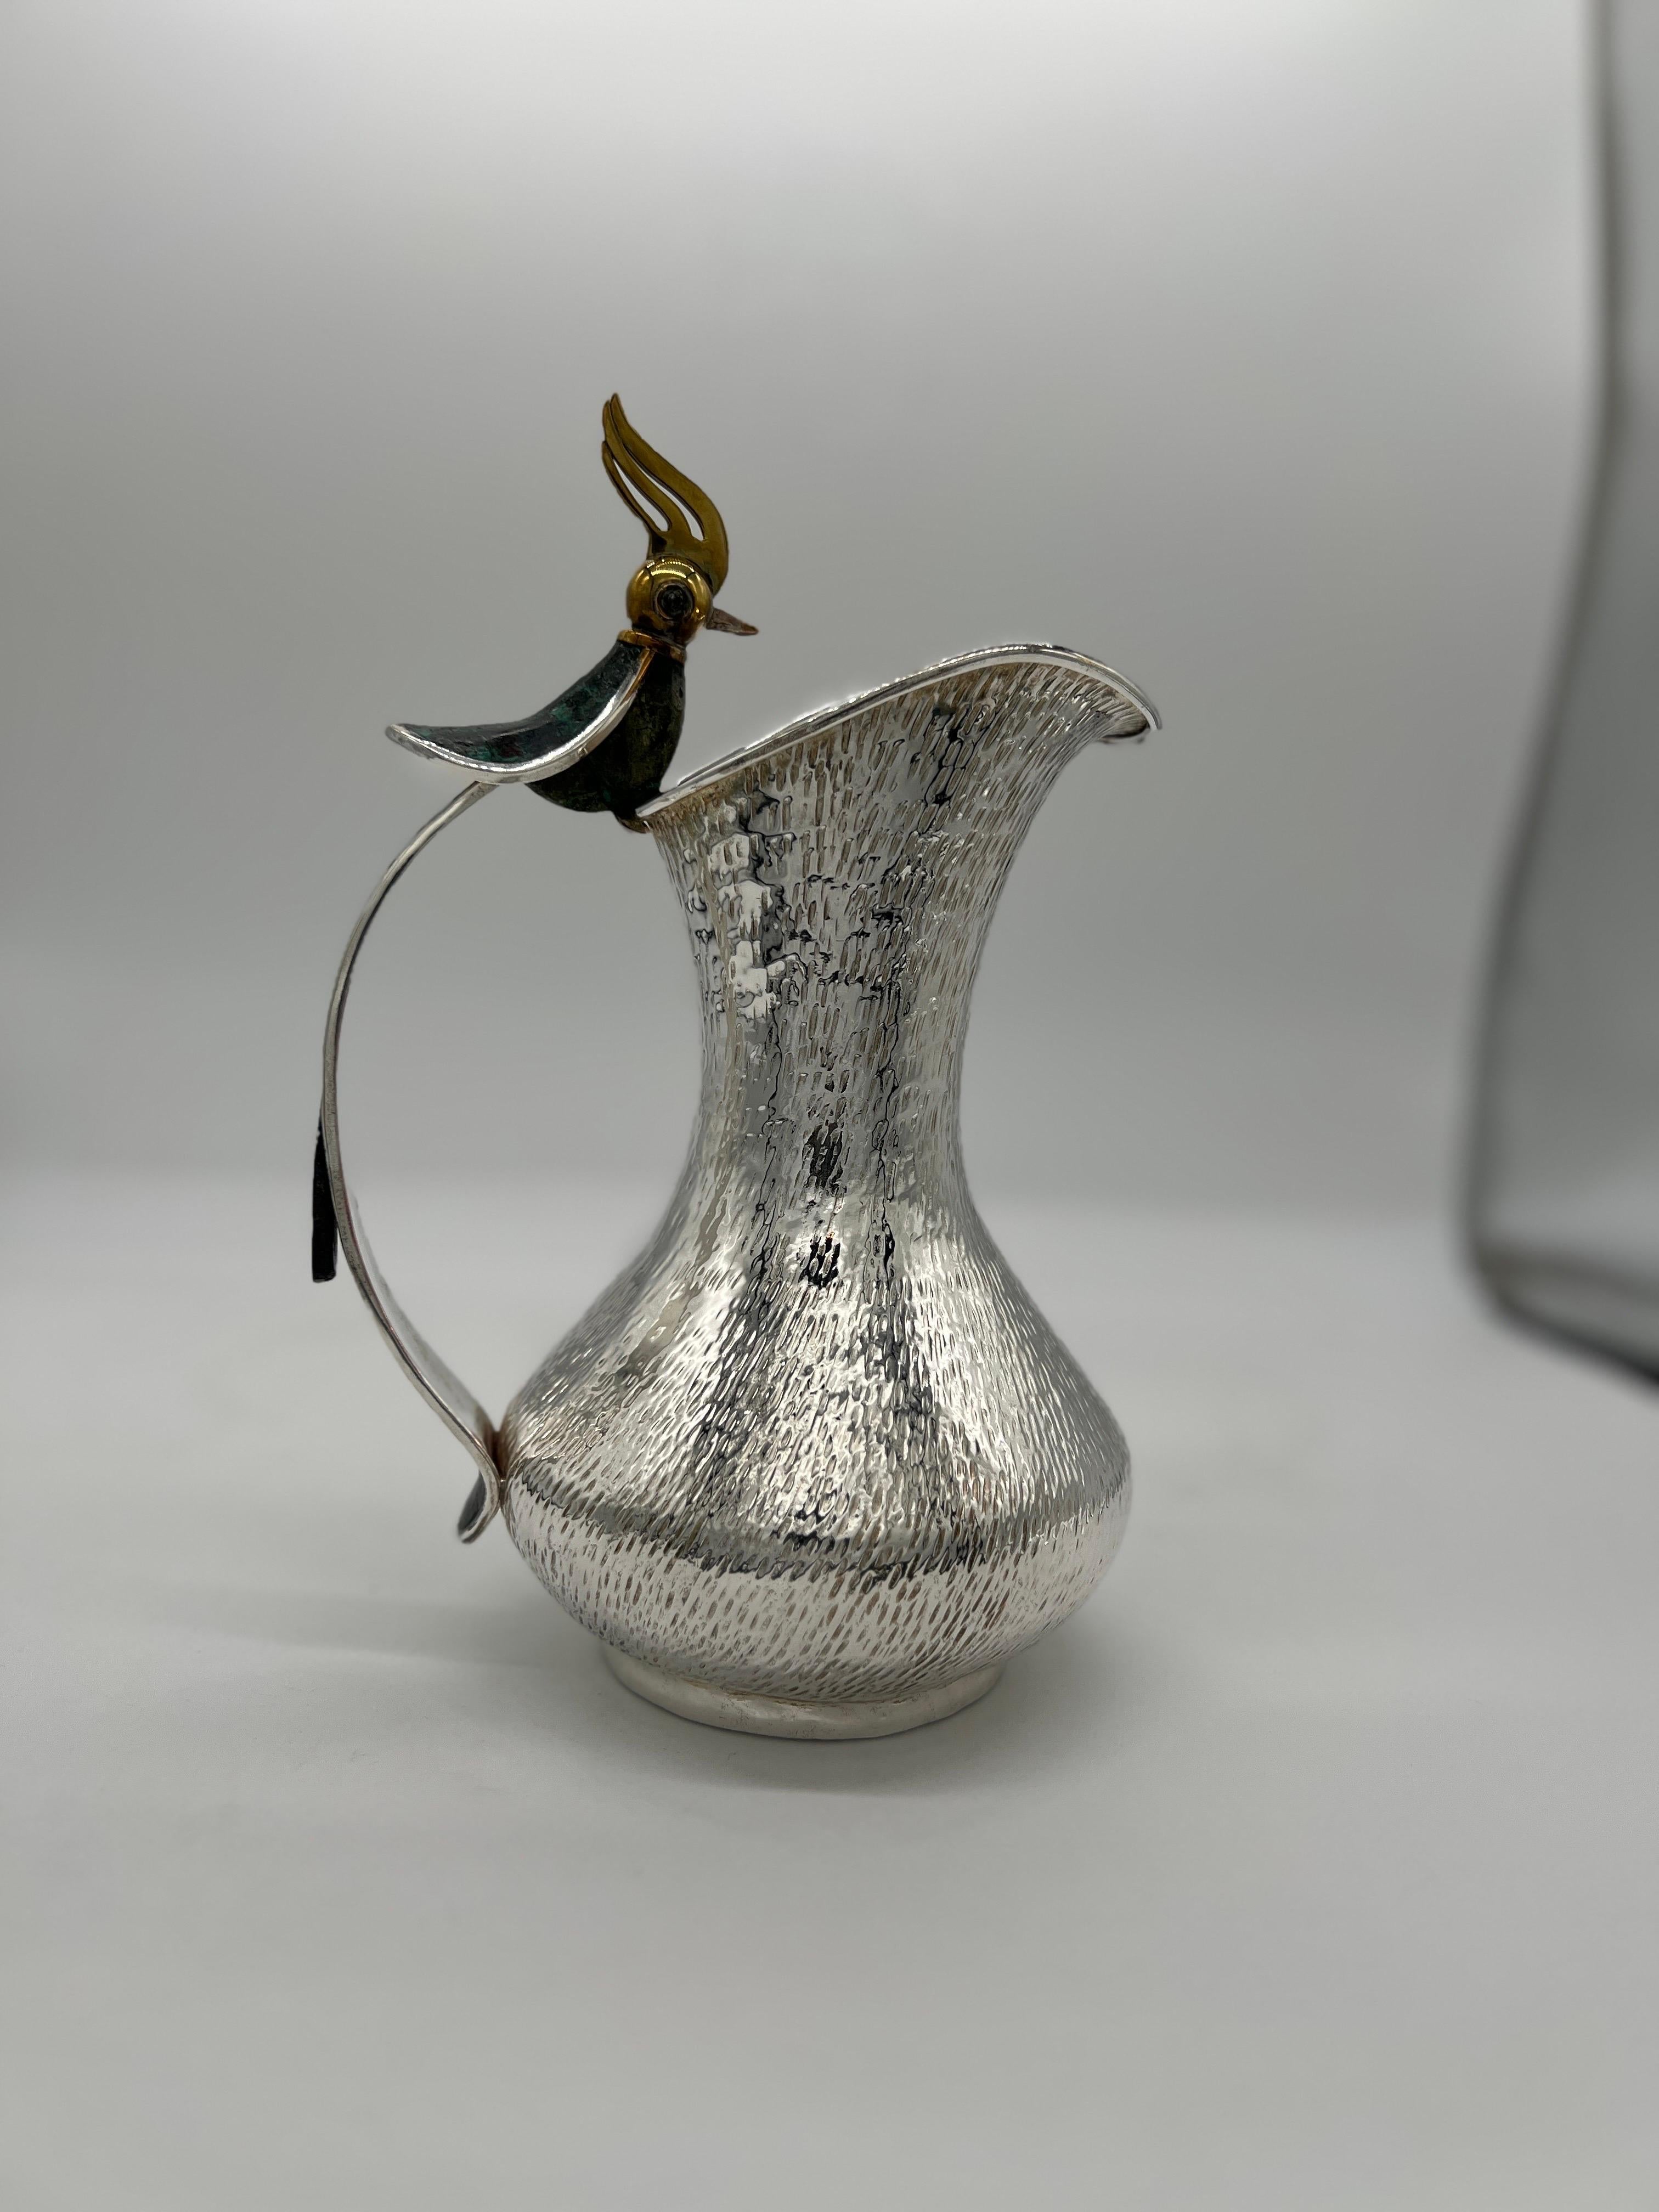 Los Castillo (Mexican, founed 1939), circa 1970. 

A silverplated pitcher with hand hammered and sculpted finish. The pitcher is affixed with a brass hummingbird adorned with lapis and malachite veneer, the tail of the bird forms the pitcher's